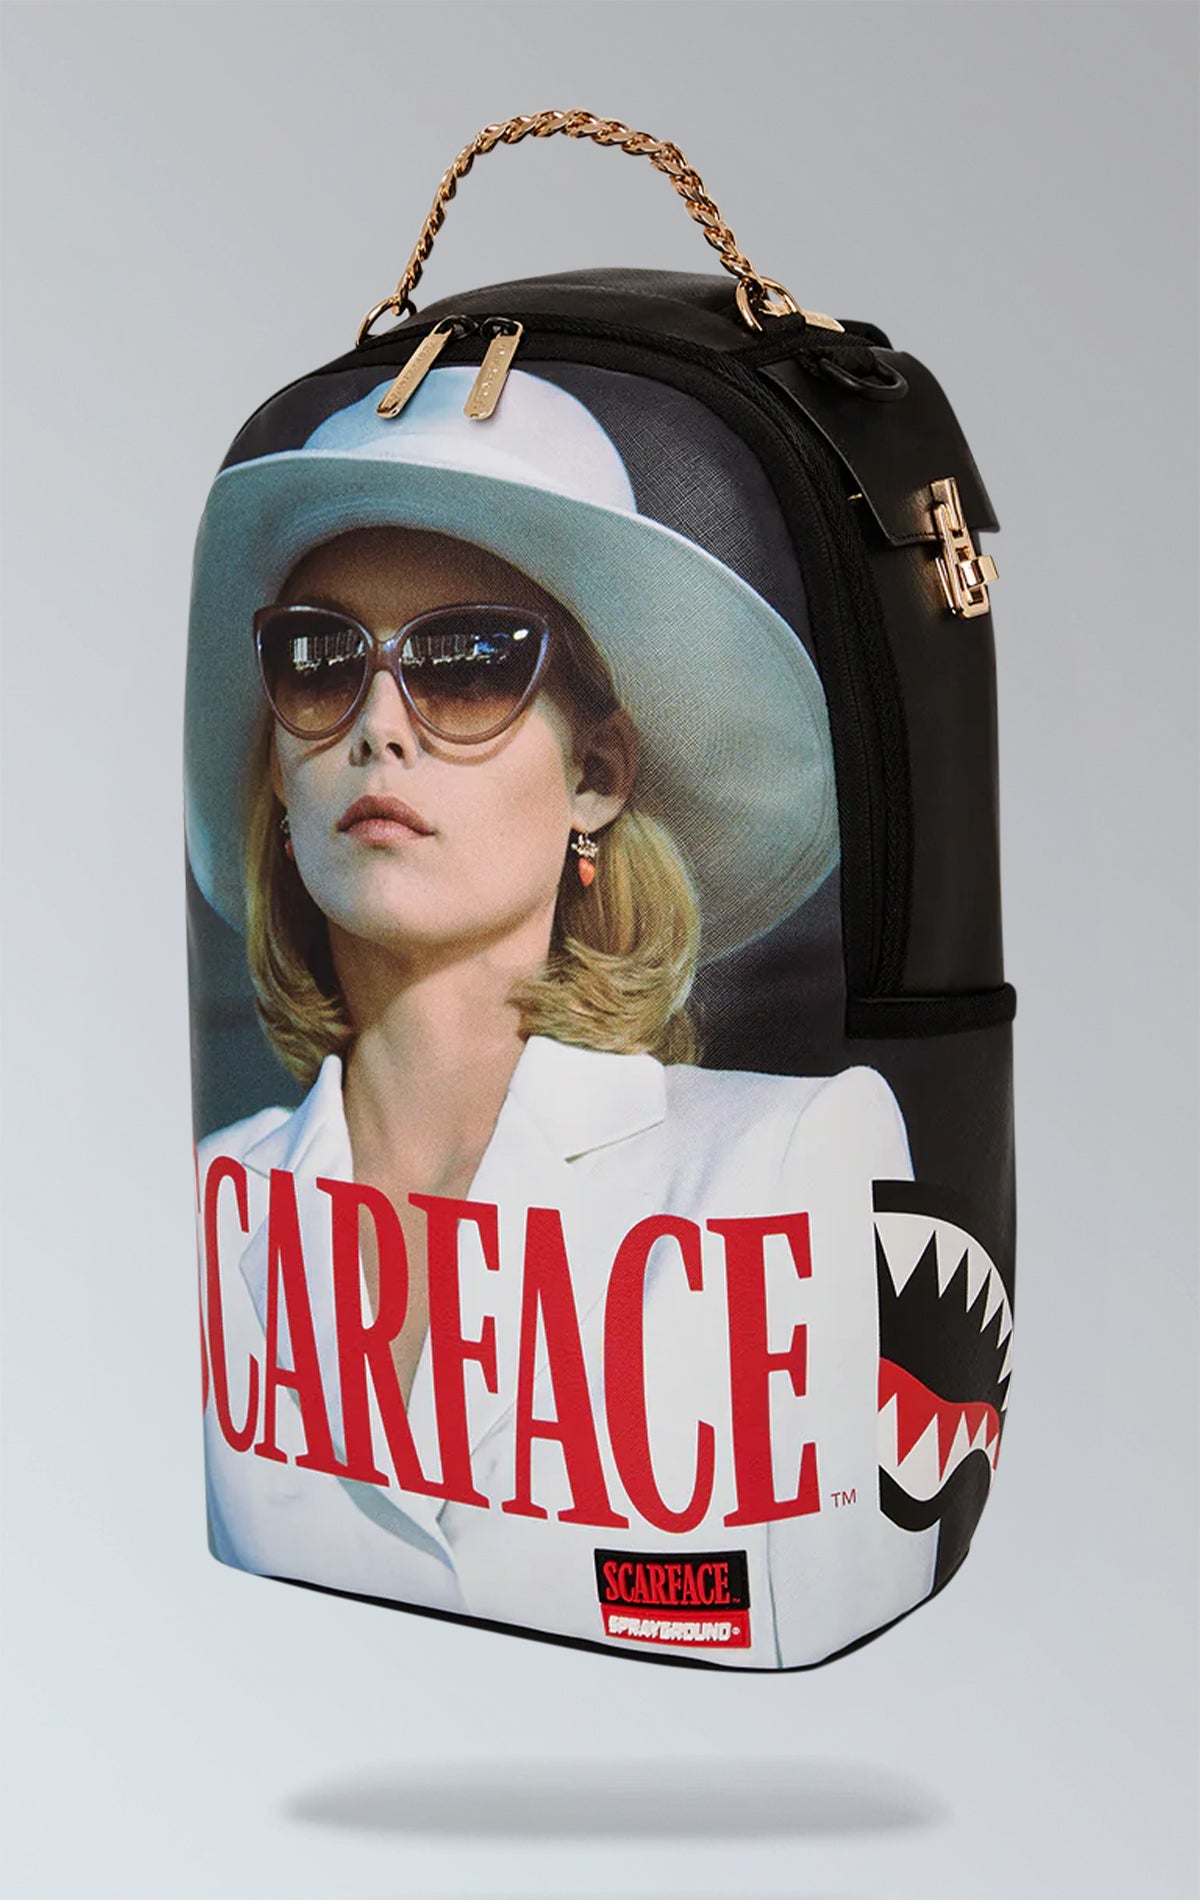 SCARFACE MICHELLE PFEIFFER BACKPACK. Exterior: Measurements: 18" x 6" x 11.5" Front zip pocket, side pockets, stash pocket with zipper. Separate compartment for sunglasses with velour lining, comfortable padded mesh back. Flexible straps for personalized fit. Gold zippers and metal hardware. "Sprayground Authentic" badge in metal. Back sleeve with strap attaches to carry-on luggage for hands-free travel.